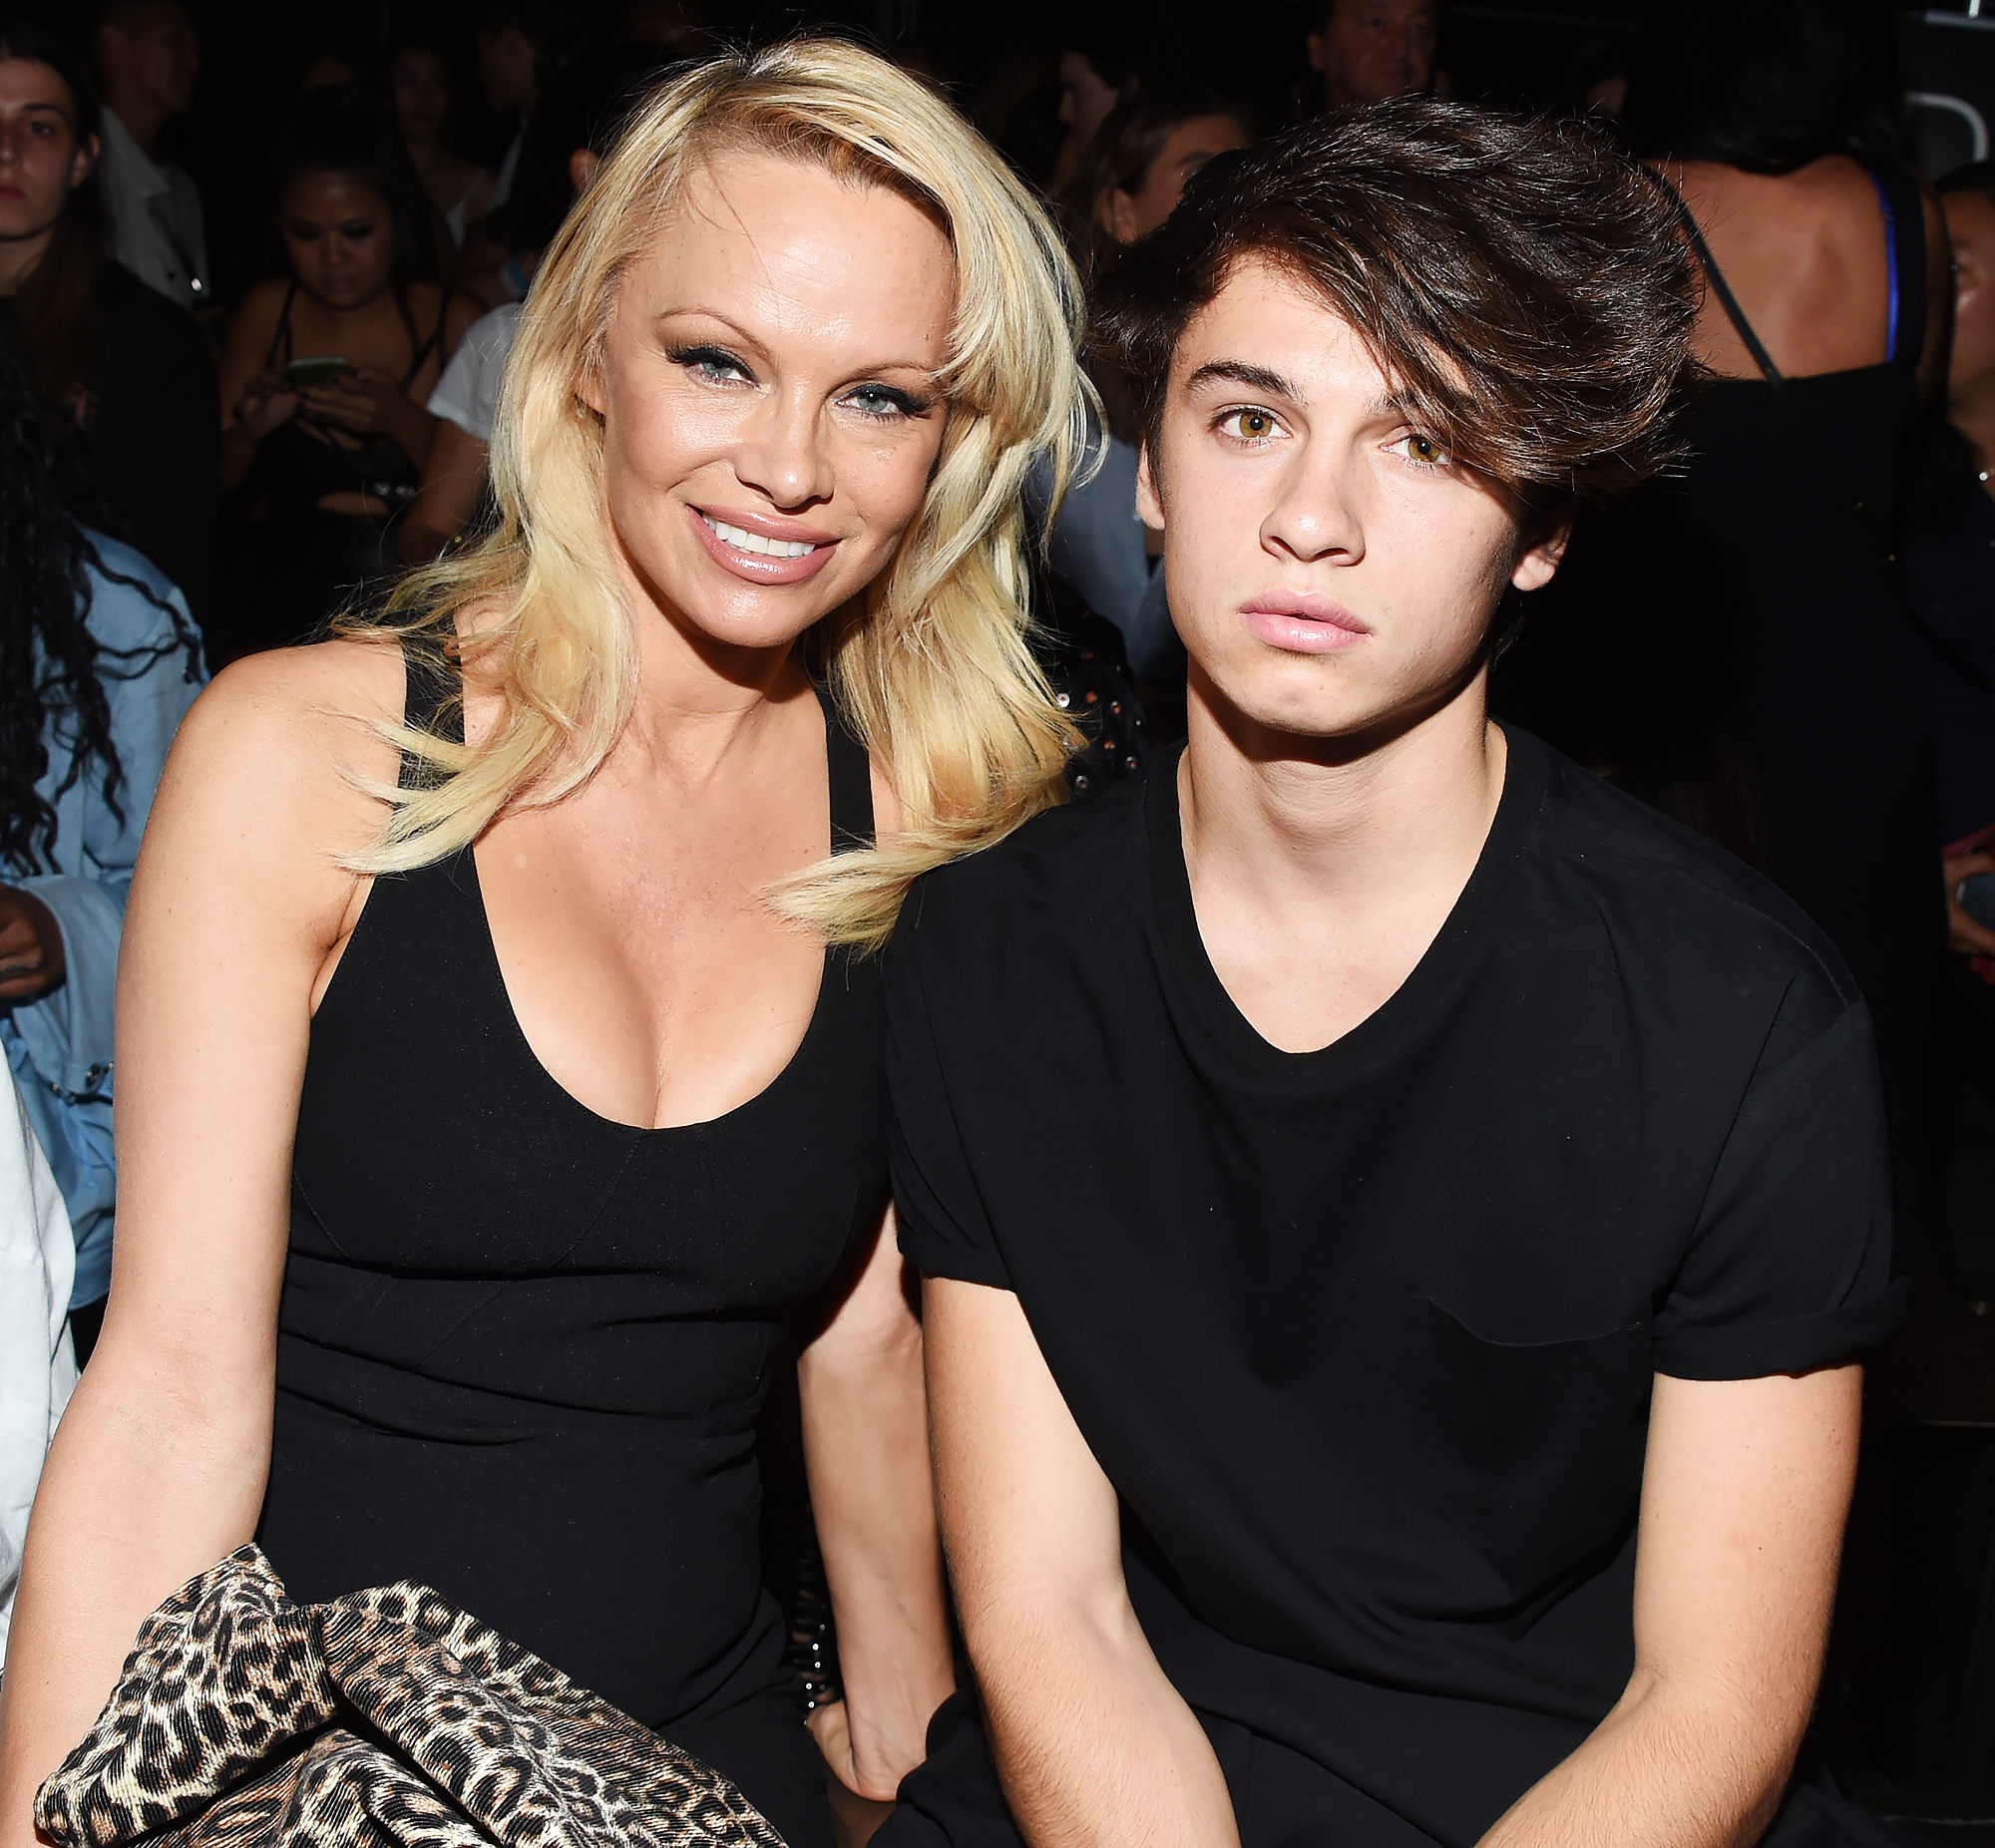 Dylan Jagger Lee Reveals What His Parents Pamela Anderson and Tommy Lee Think of His New Music